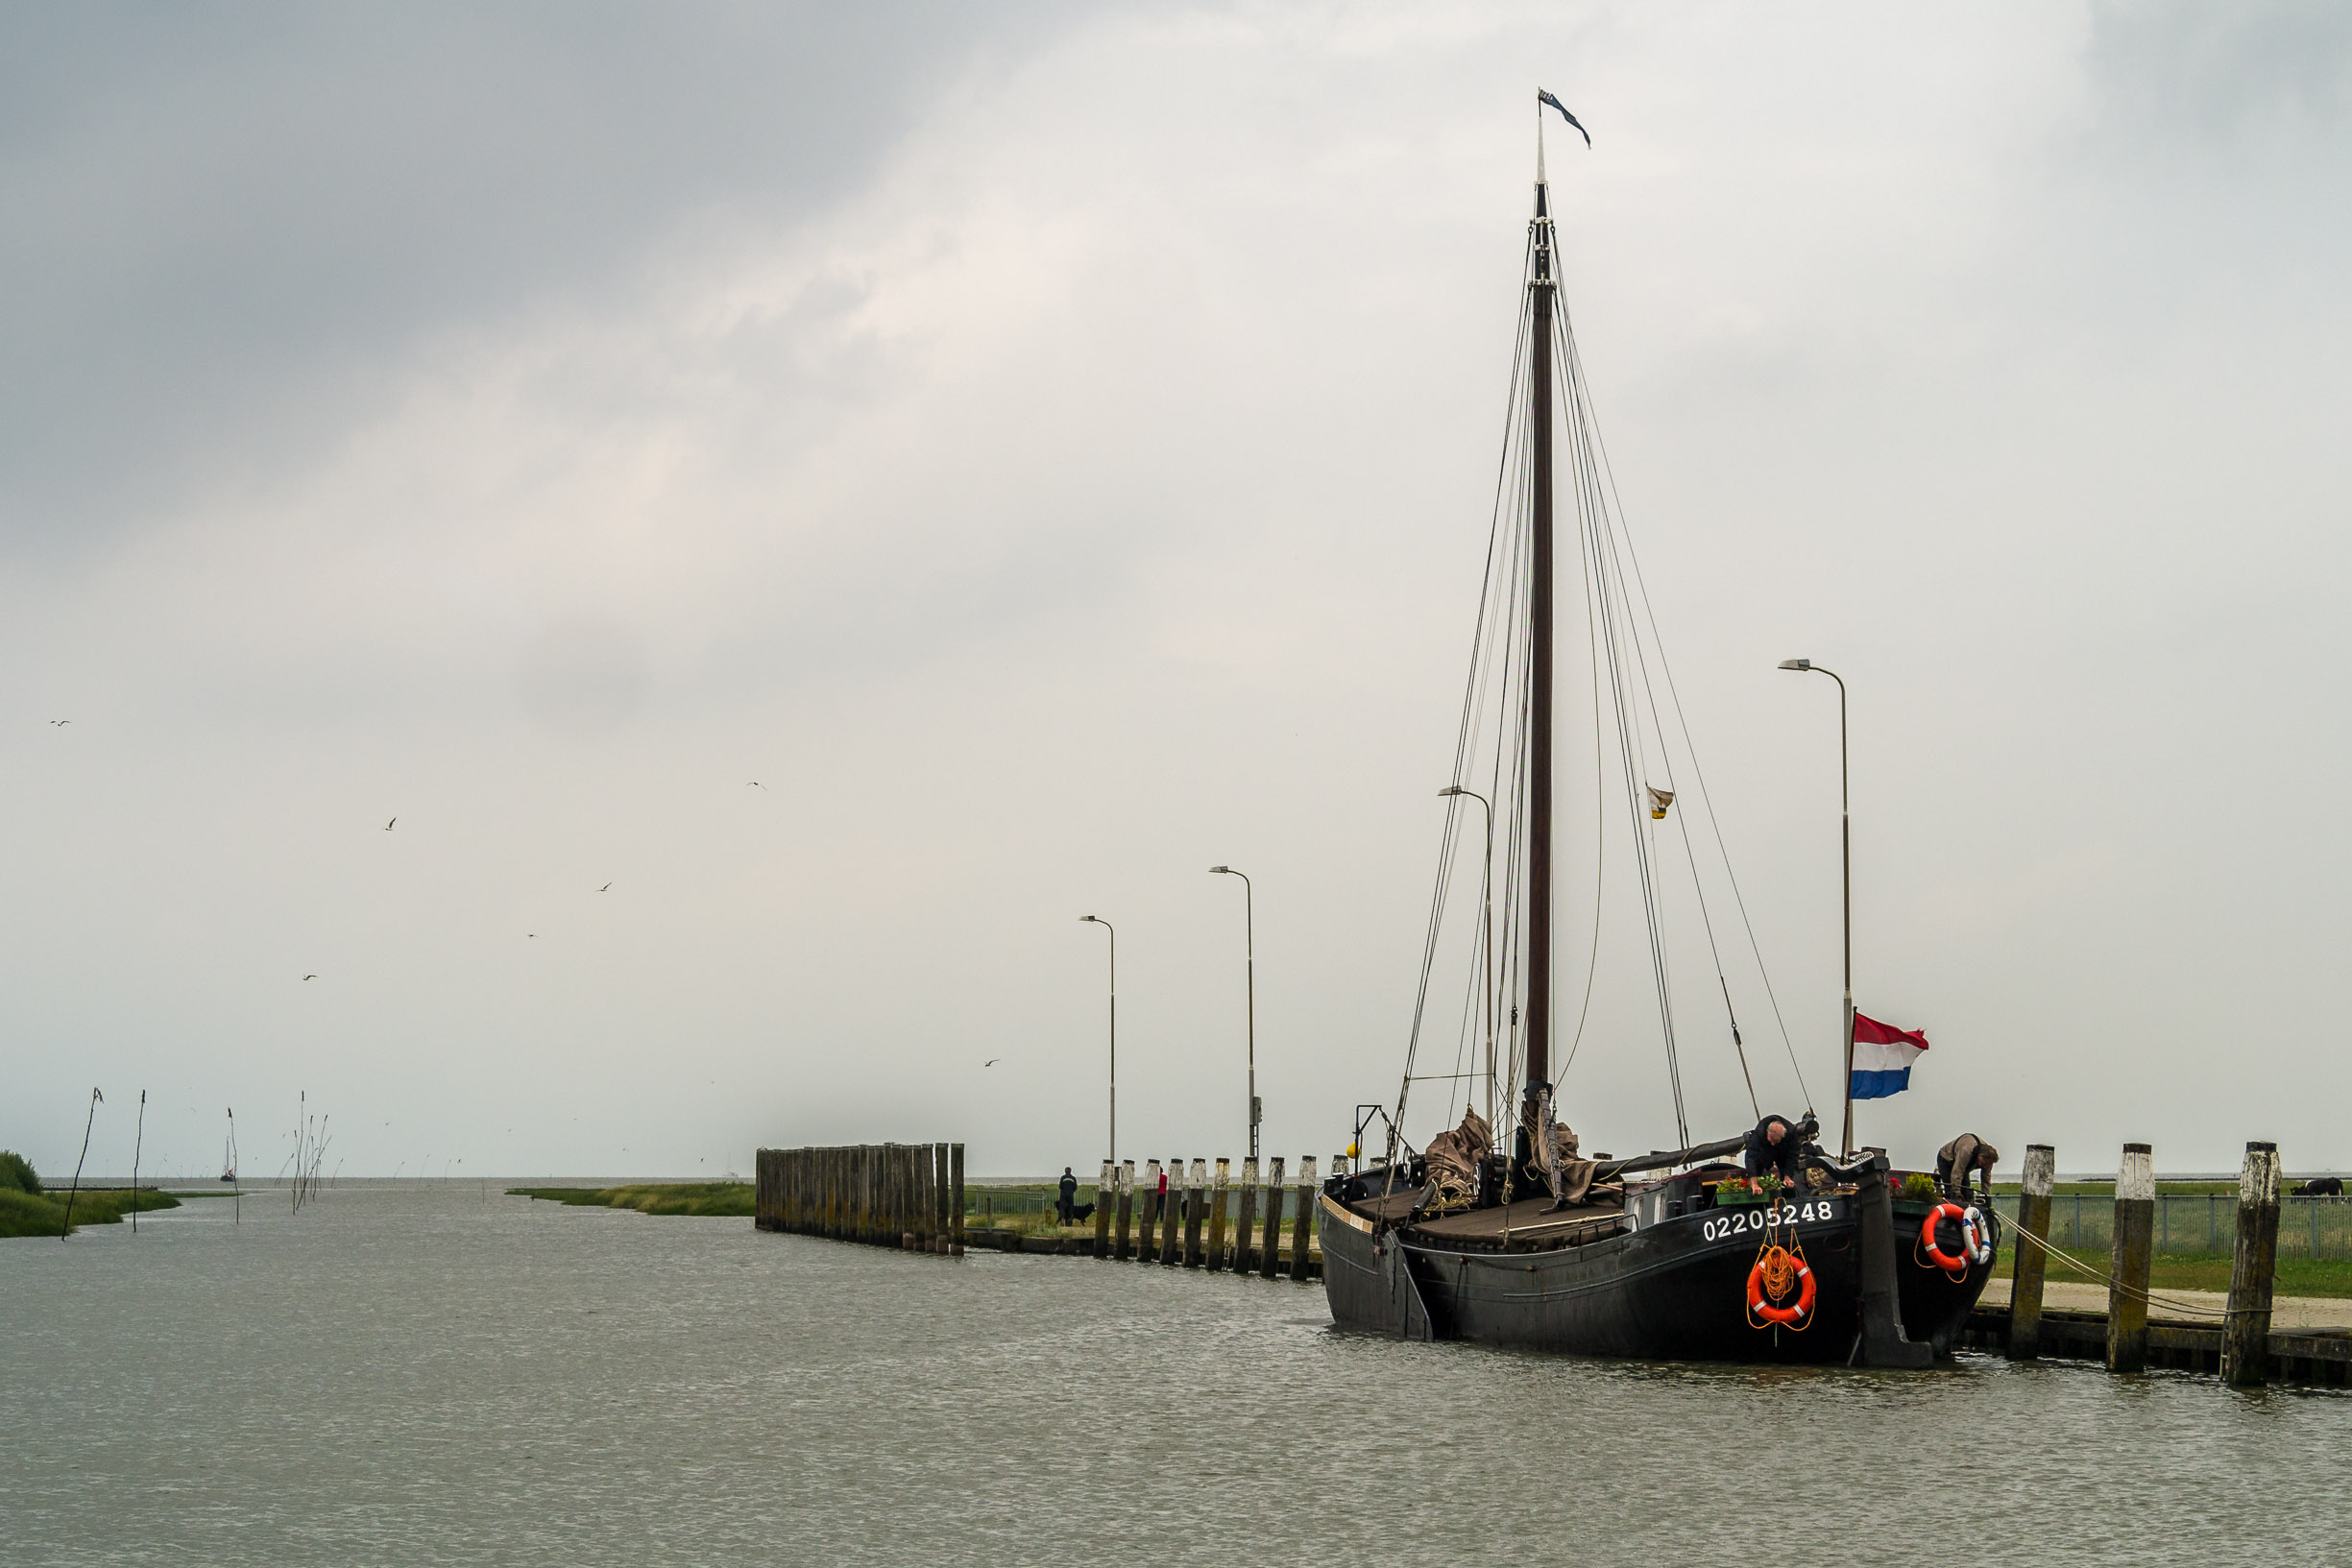 Old transport ship in the smallest sea going harbour of the Netherlands